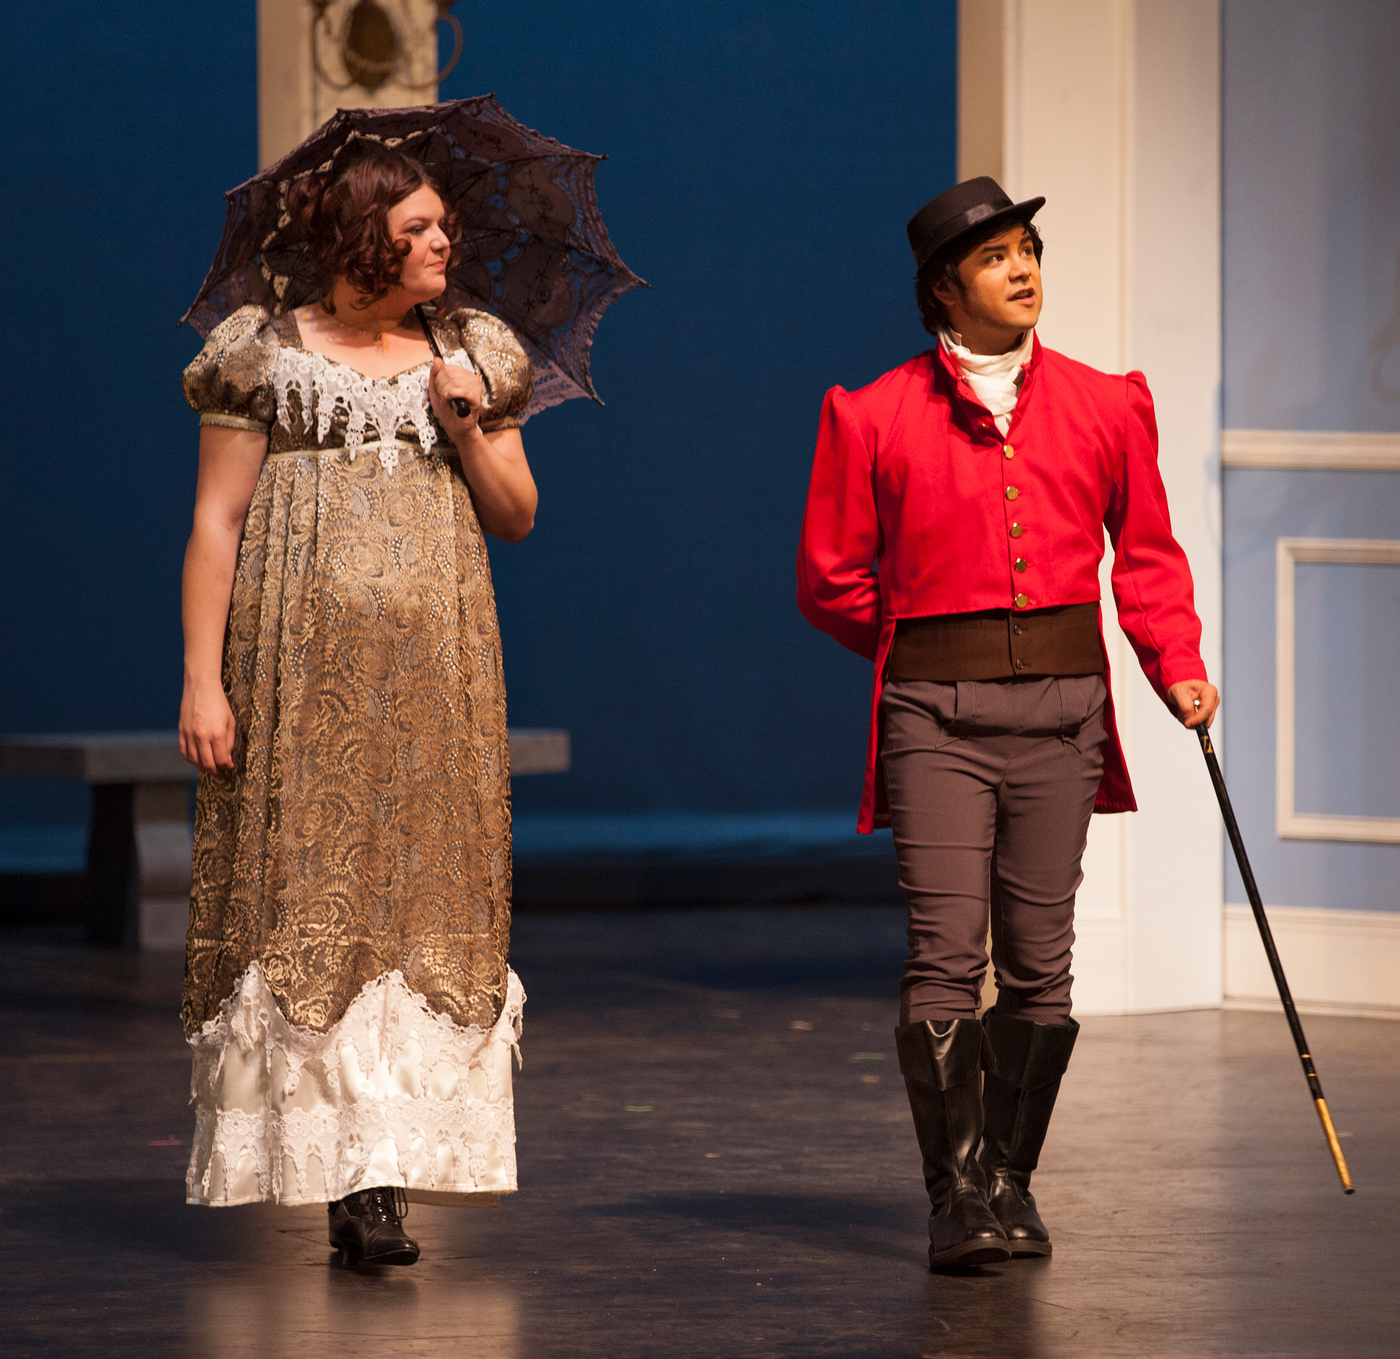 Elizabeth Benett, played by Denise Ivy, and George Wickam, played by Brennan Villados, meet for the first time in the play "Pride and Prejudice," put on by City Theatre at City College. Vanessa Nelson, Photo Editor. | vanessanelsonexpress@gmail.com